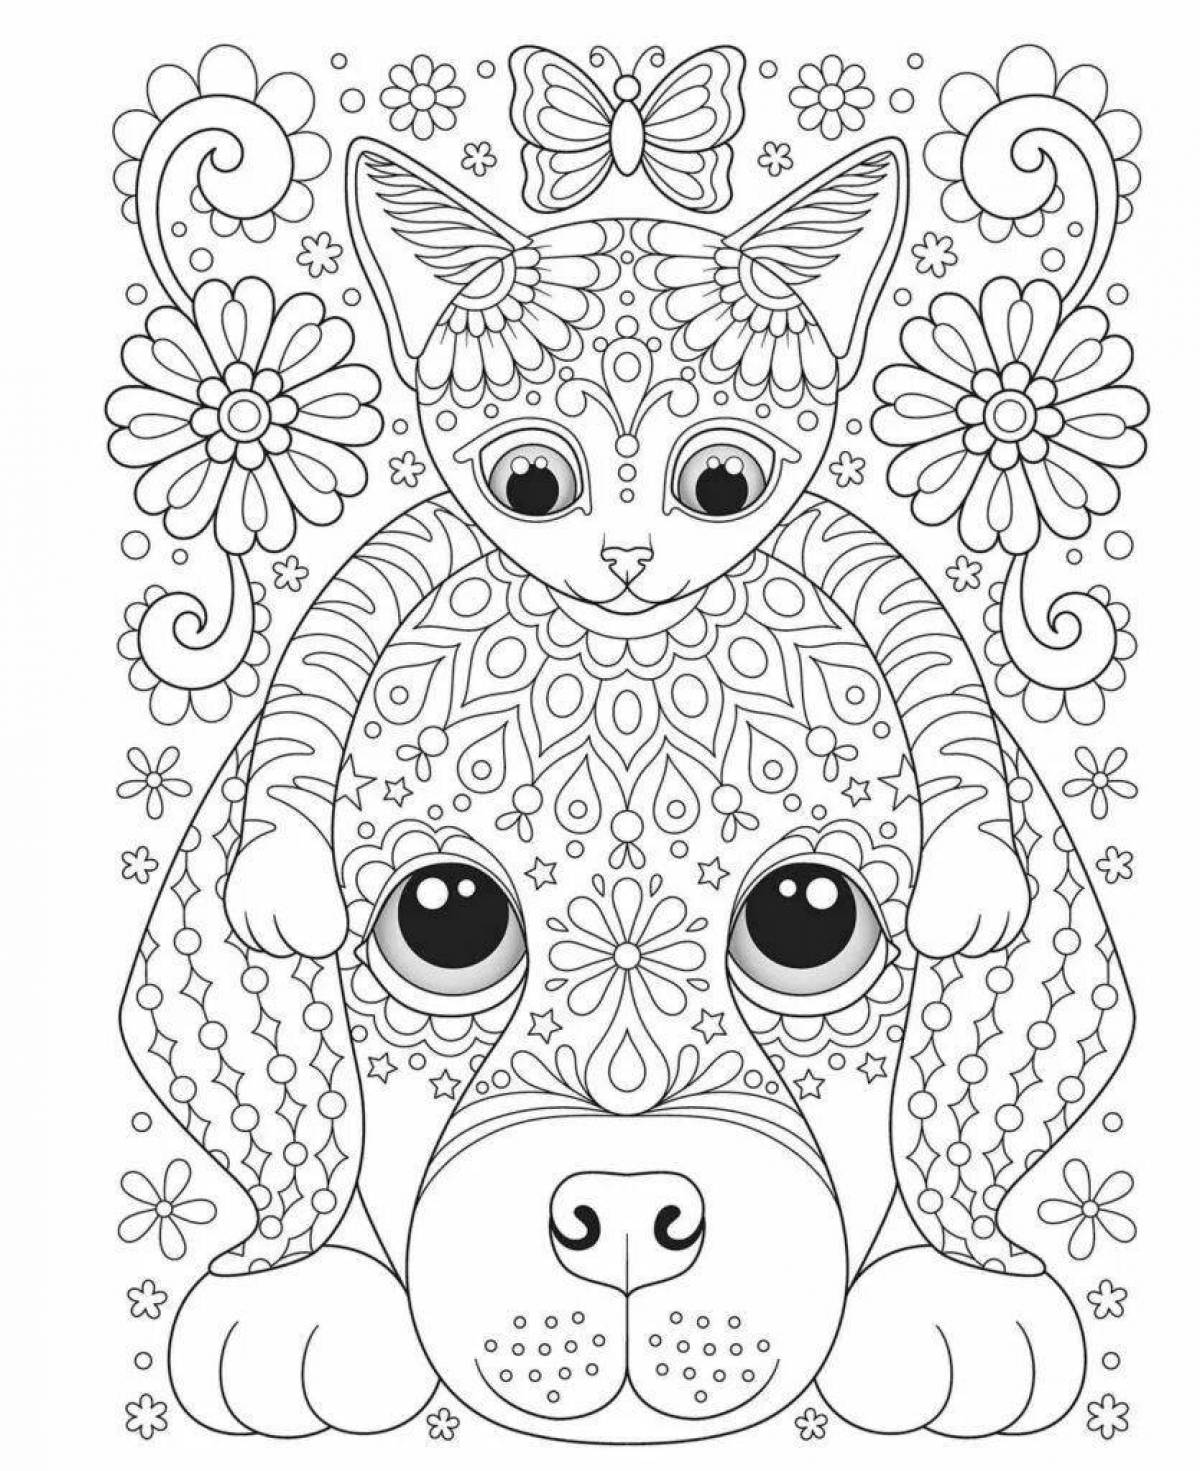 Whimsical animal coloring book for ages 12+